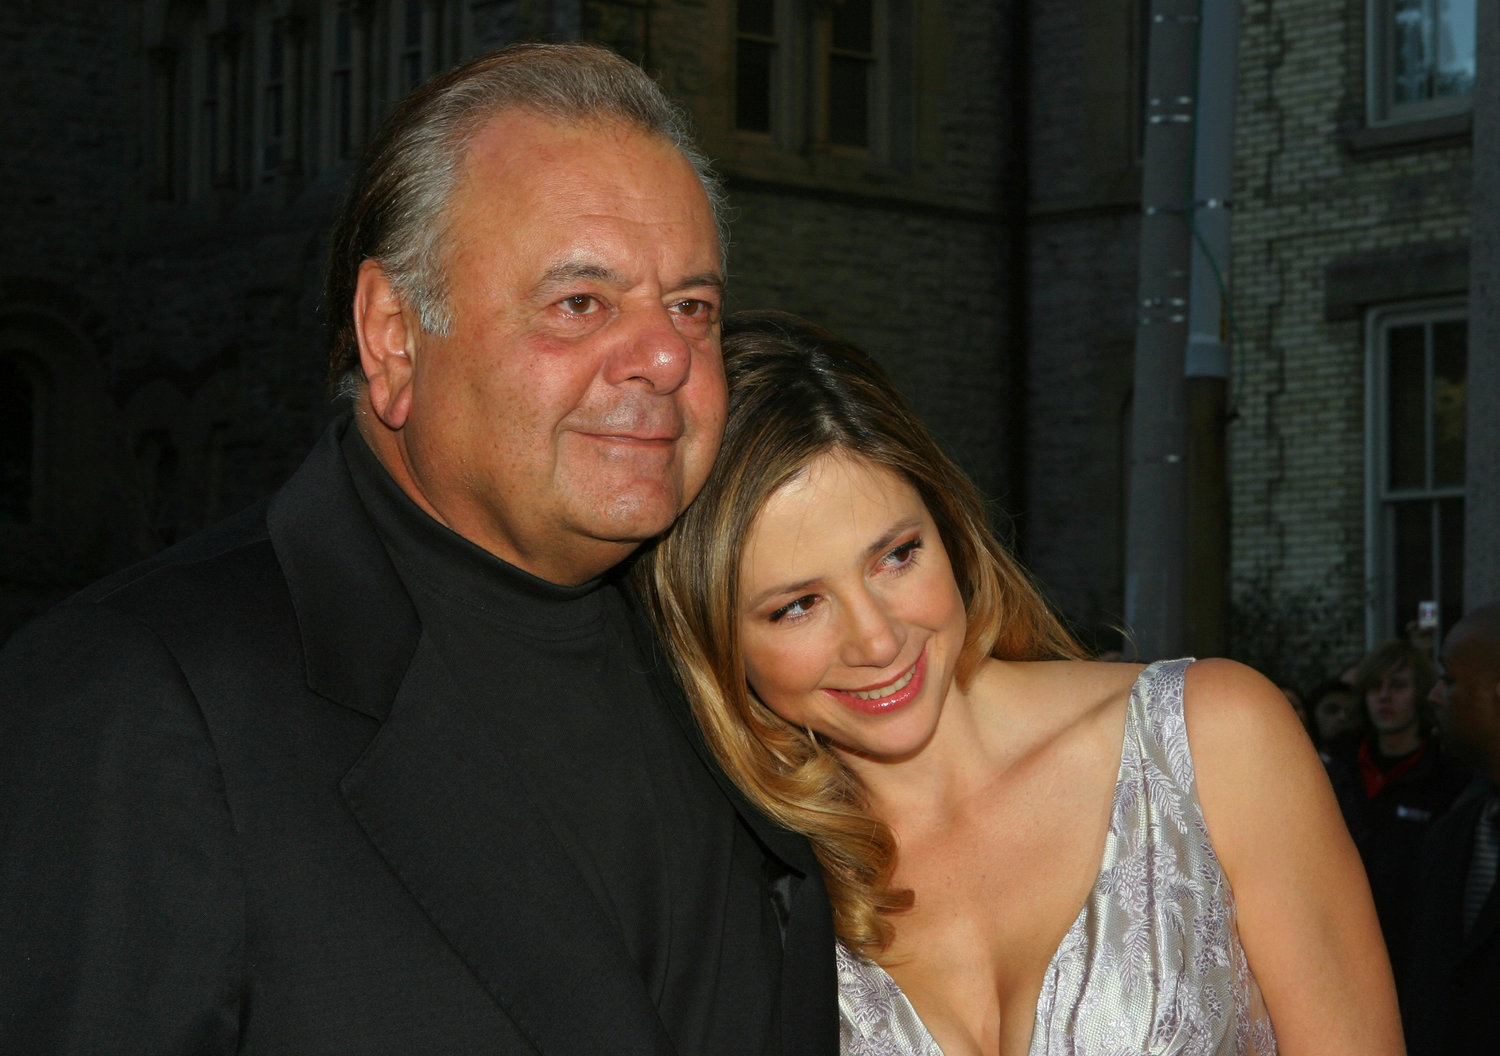 Mira Sorvino and father Paul Sorvino attend the premiere of “Reservation Road” during the Toronto International Film Festival in 2007. Paul Sorvino has died. He was 83.